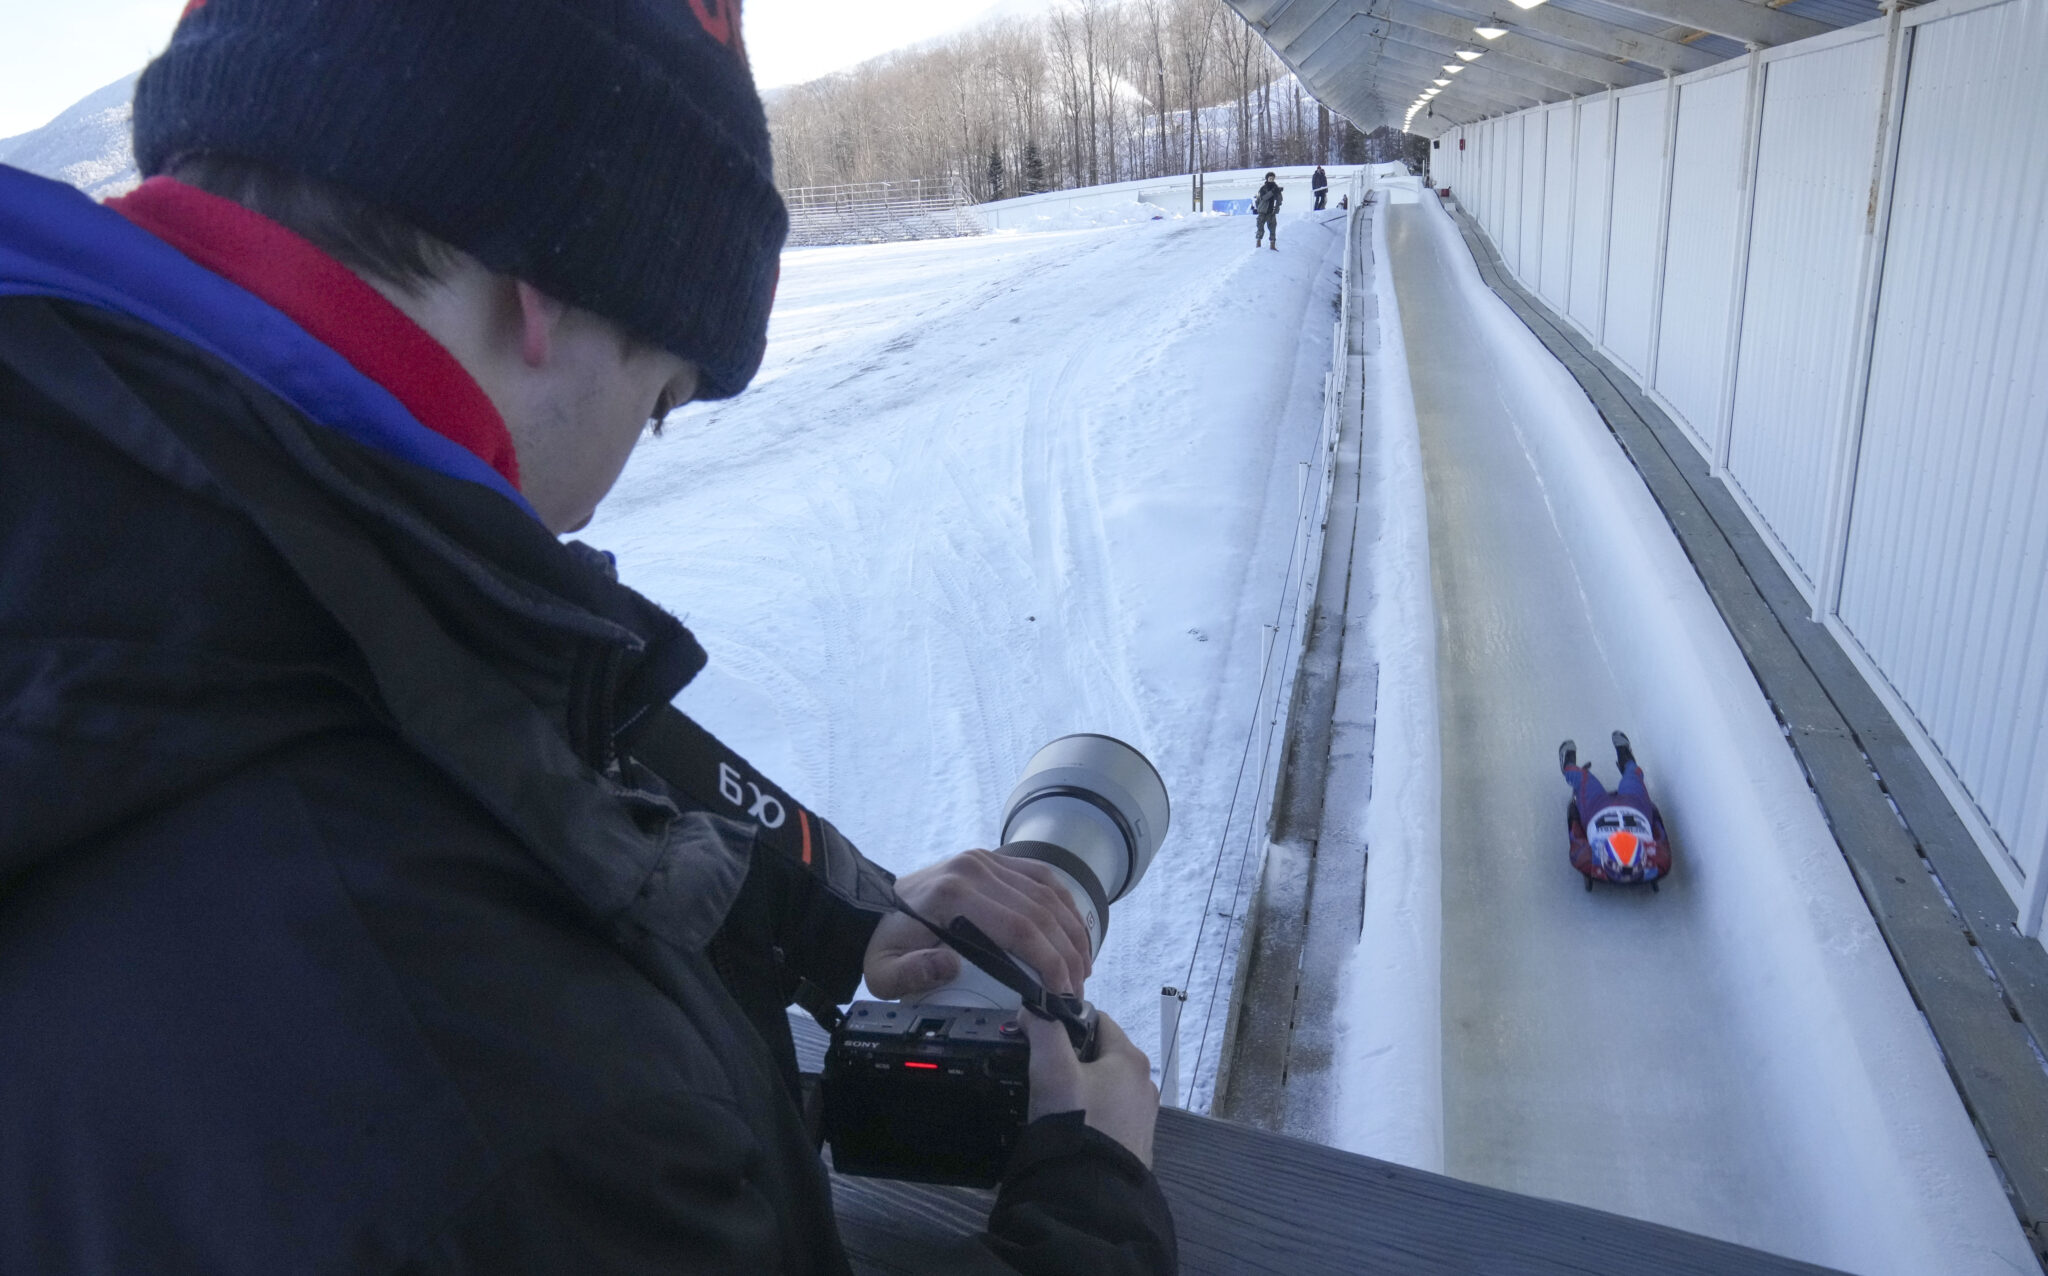 a photographer stands above a luge track and captures a an athlete going down the track